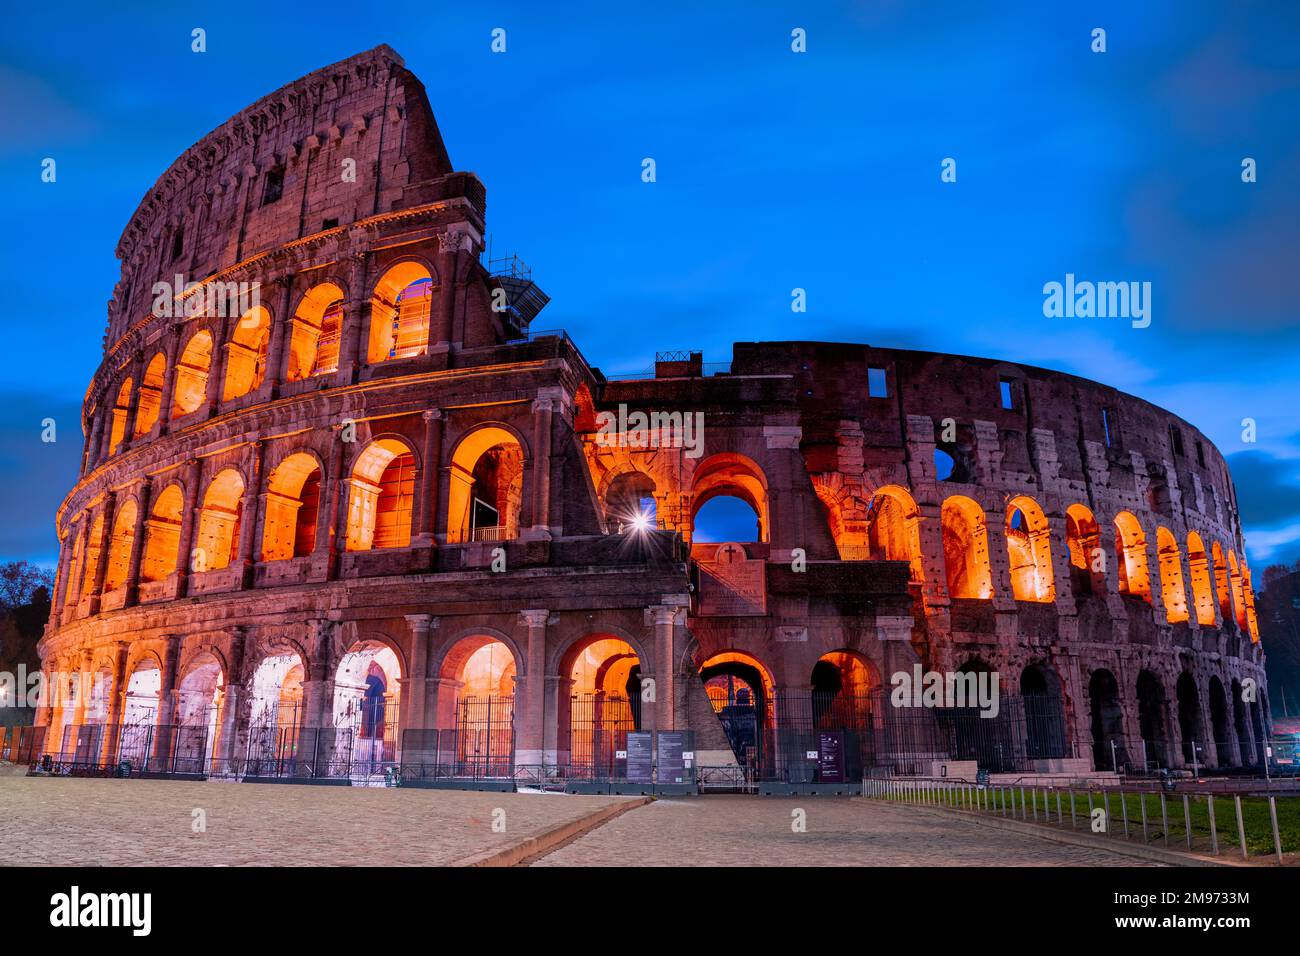 Authentic picture of the great Colosseum of Rome from outside before sunrise. Sunrise at the iconic Roman Colosseum. Stock Photo